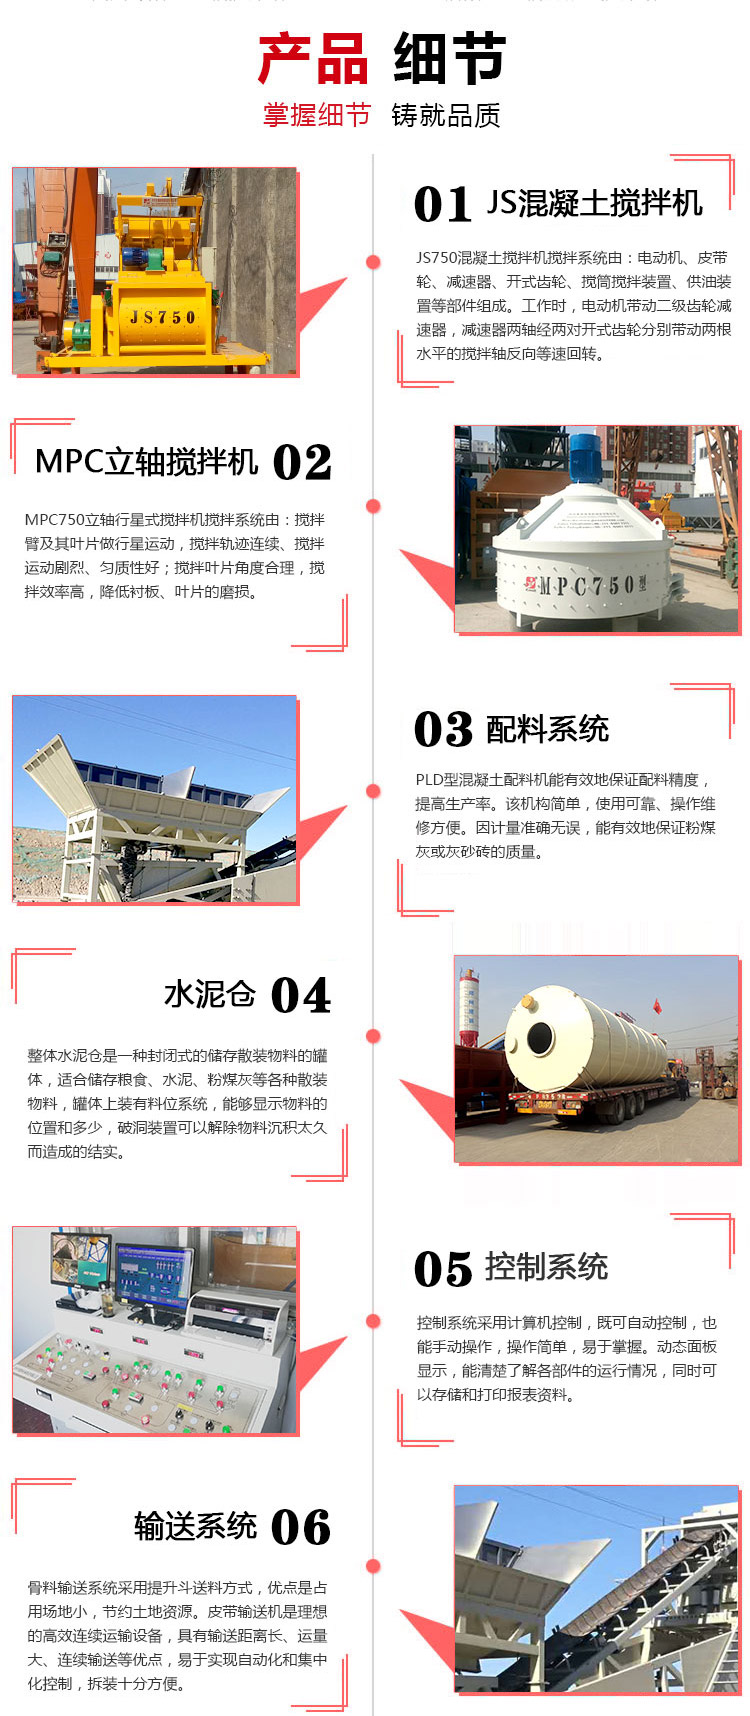 Environmental friendly mobile mixing plant construction new machinery 35 cubic meters of cement concrete mixing equipment types